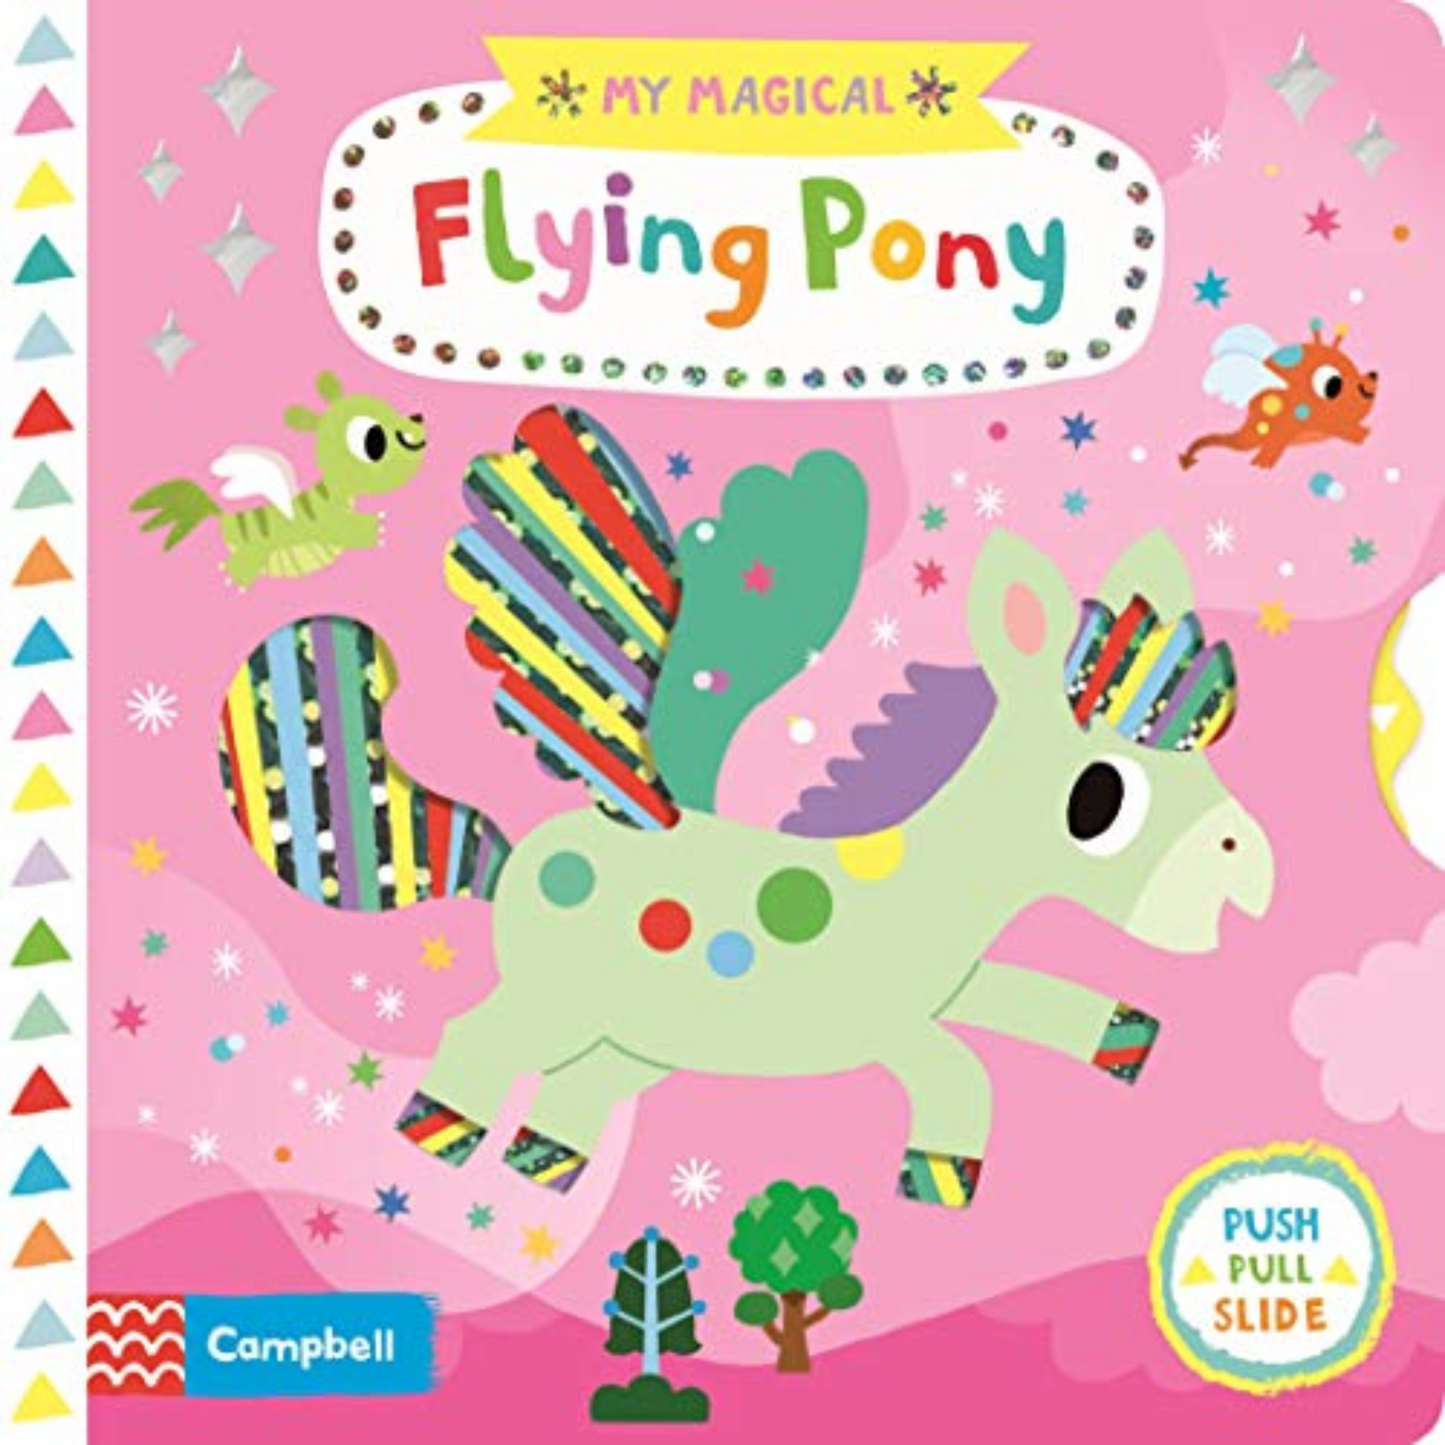 My Magical Flying Pony: Push Pull Slide Board Book By Campbell - Interest age 3-5 Years